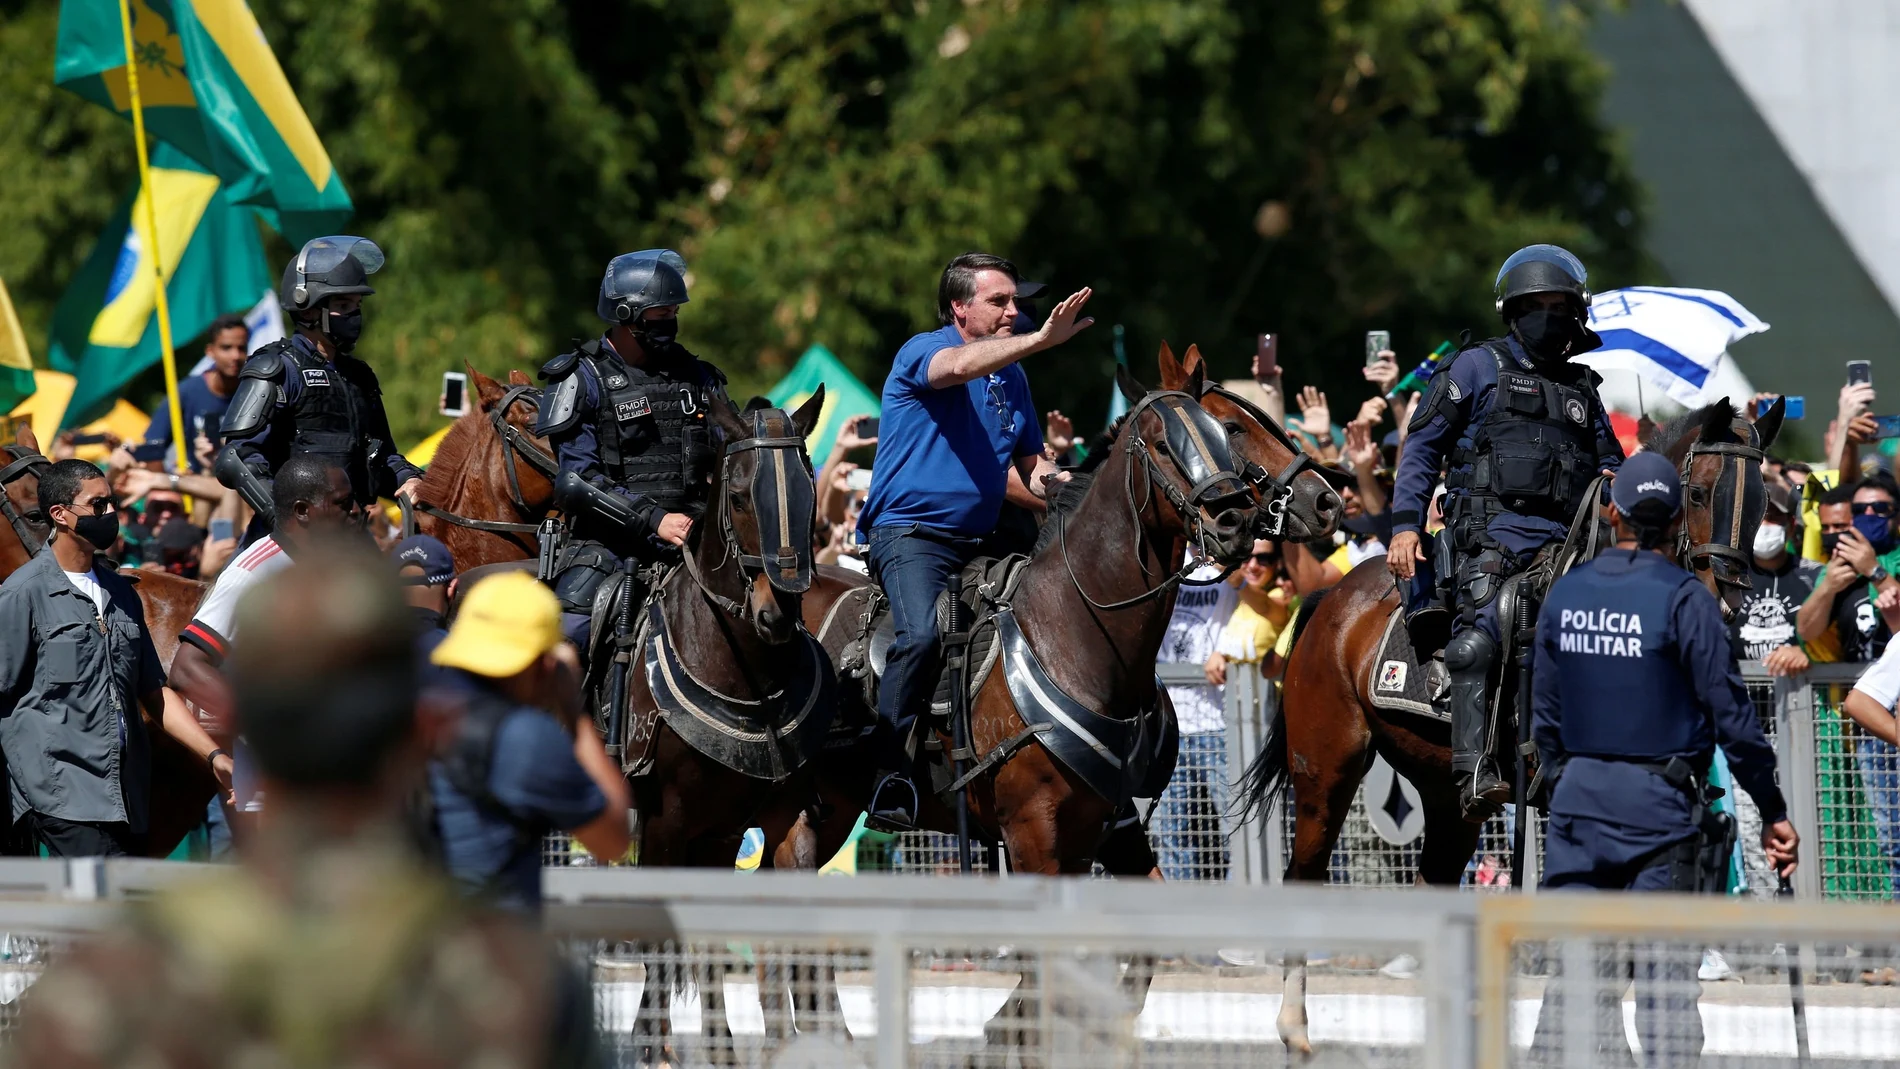 Brazil's President Jair Bolsonaro rides a horse during a meeting with supporters protesting in his favor, amid the coronavirus disease (COVID-19) outbreak, in Brasilia